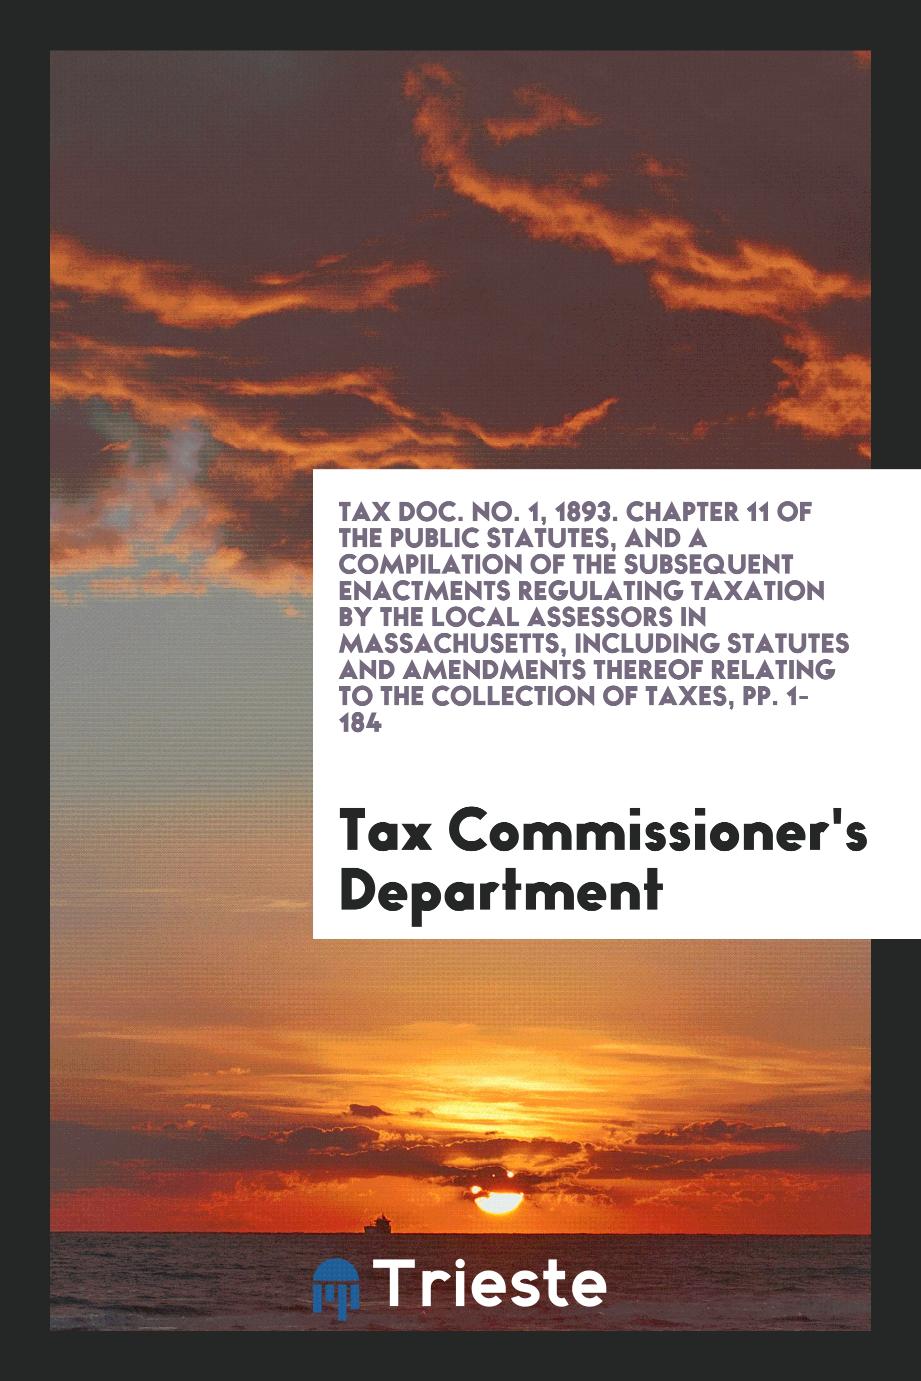 Tax Doc. No. 1, 1893. Chapter 11 of the Public Statutes, and a Compilation of the Subsequent Enactments Regulating Taxation by the Local Assessors in Massachusetts, Including Statutes and Amendments thereof Relating to the Collection of Taxes, pp. 1-184